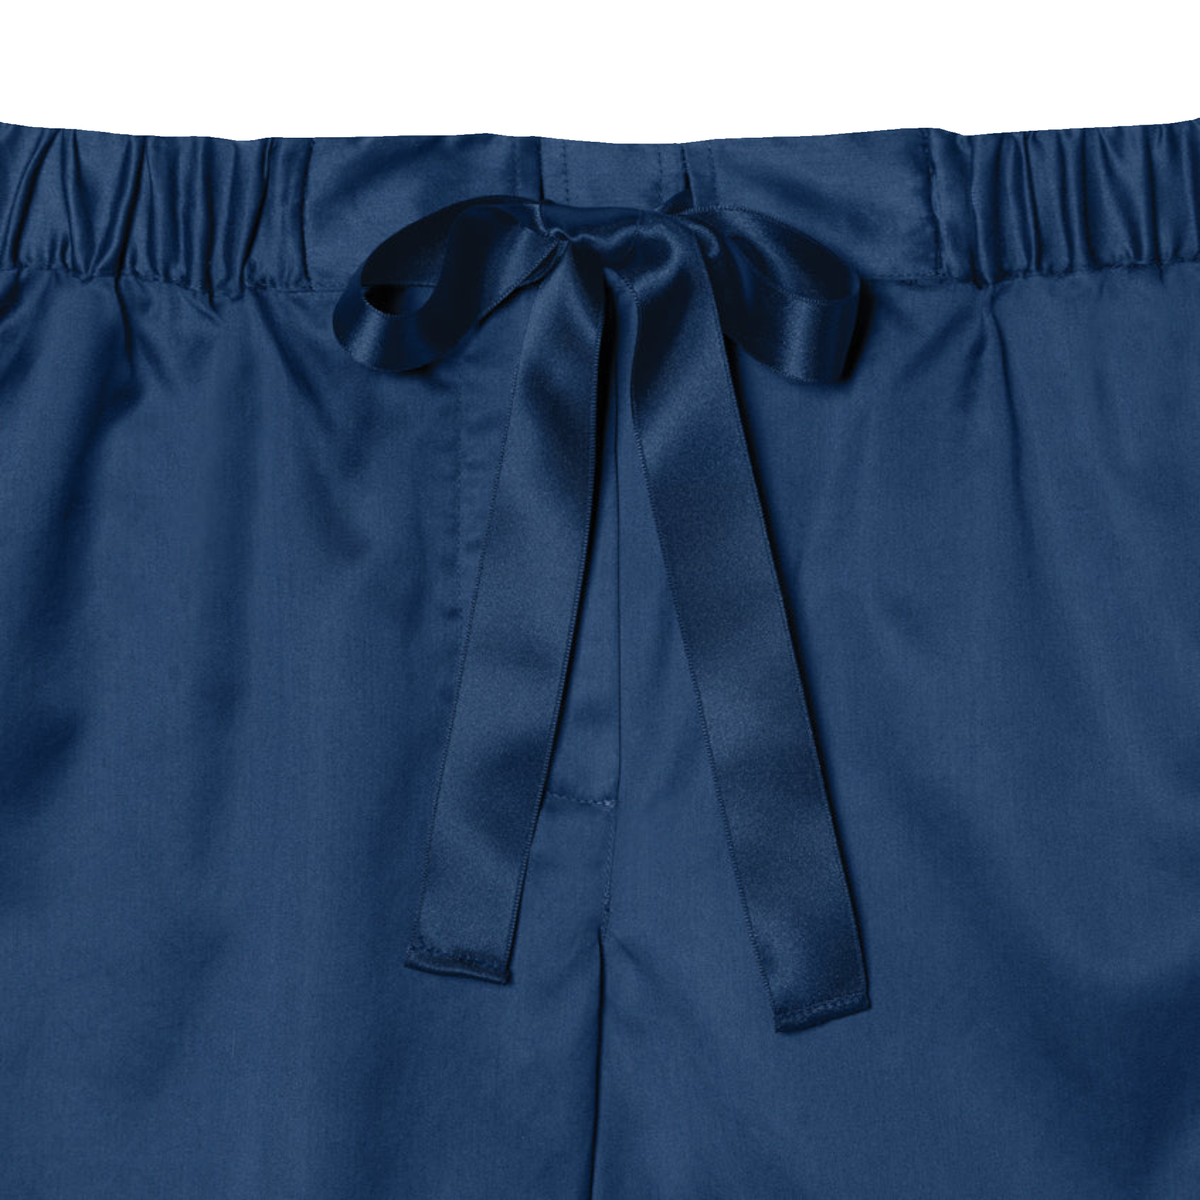 Drawstring View of Navy  Sferra Caricia Pant Against a White Background